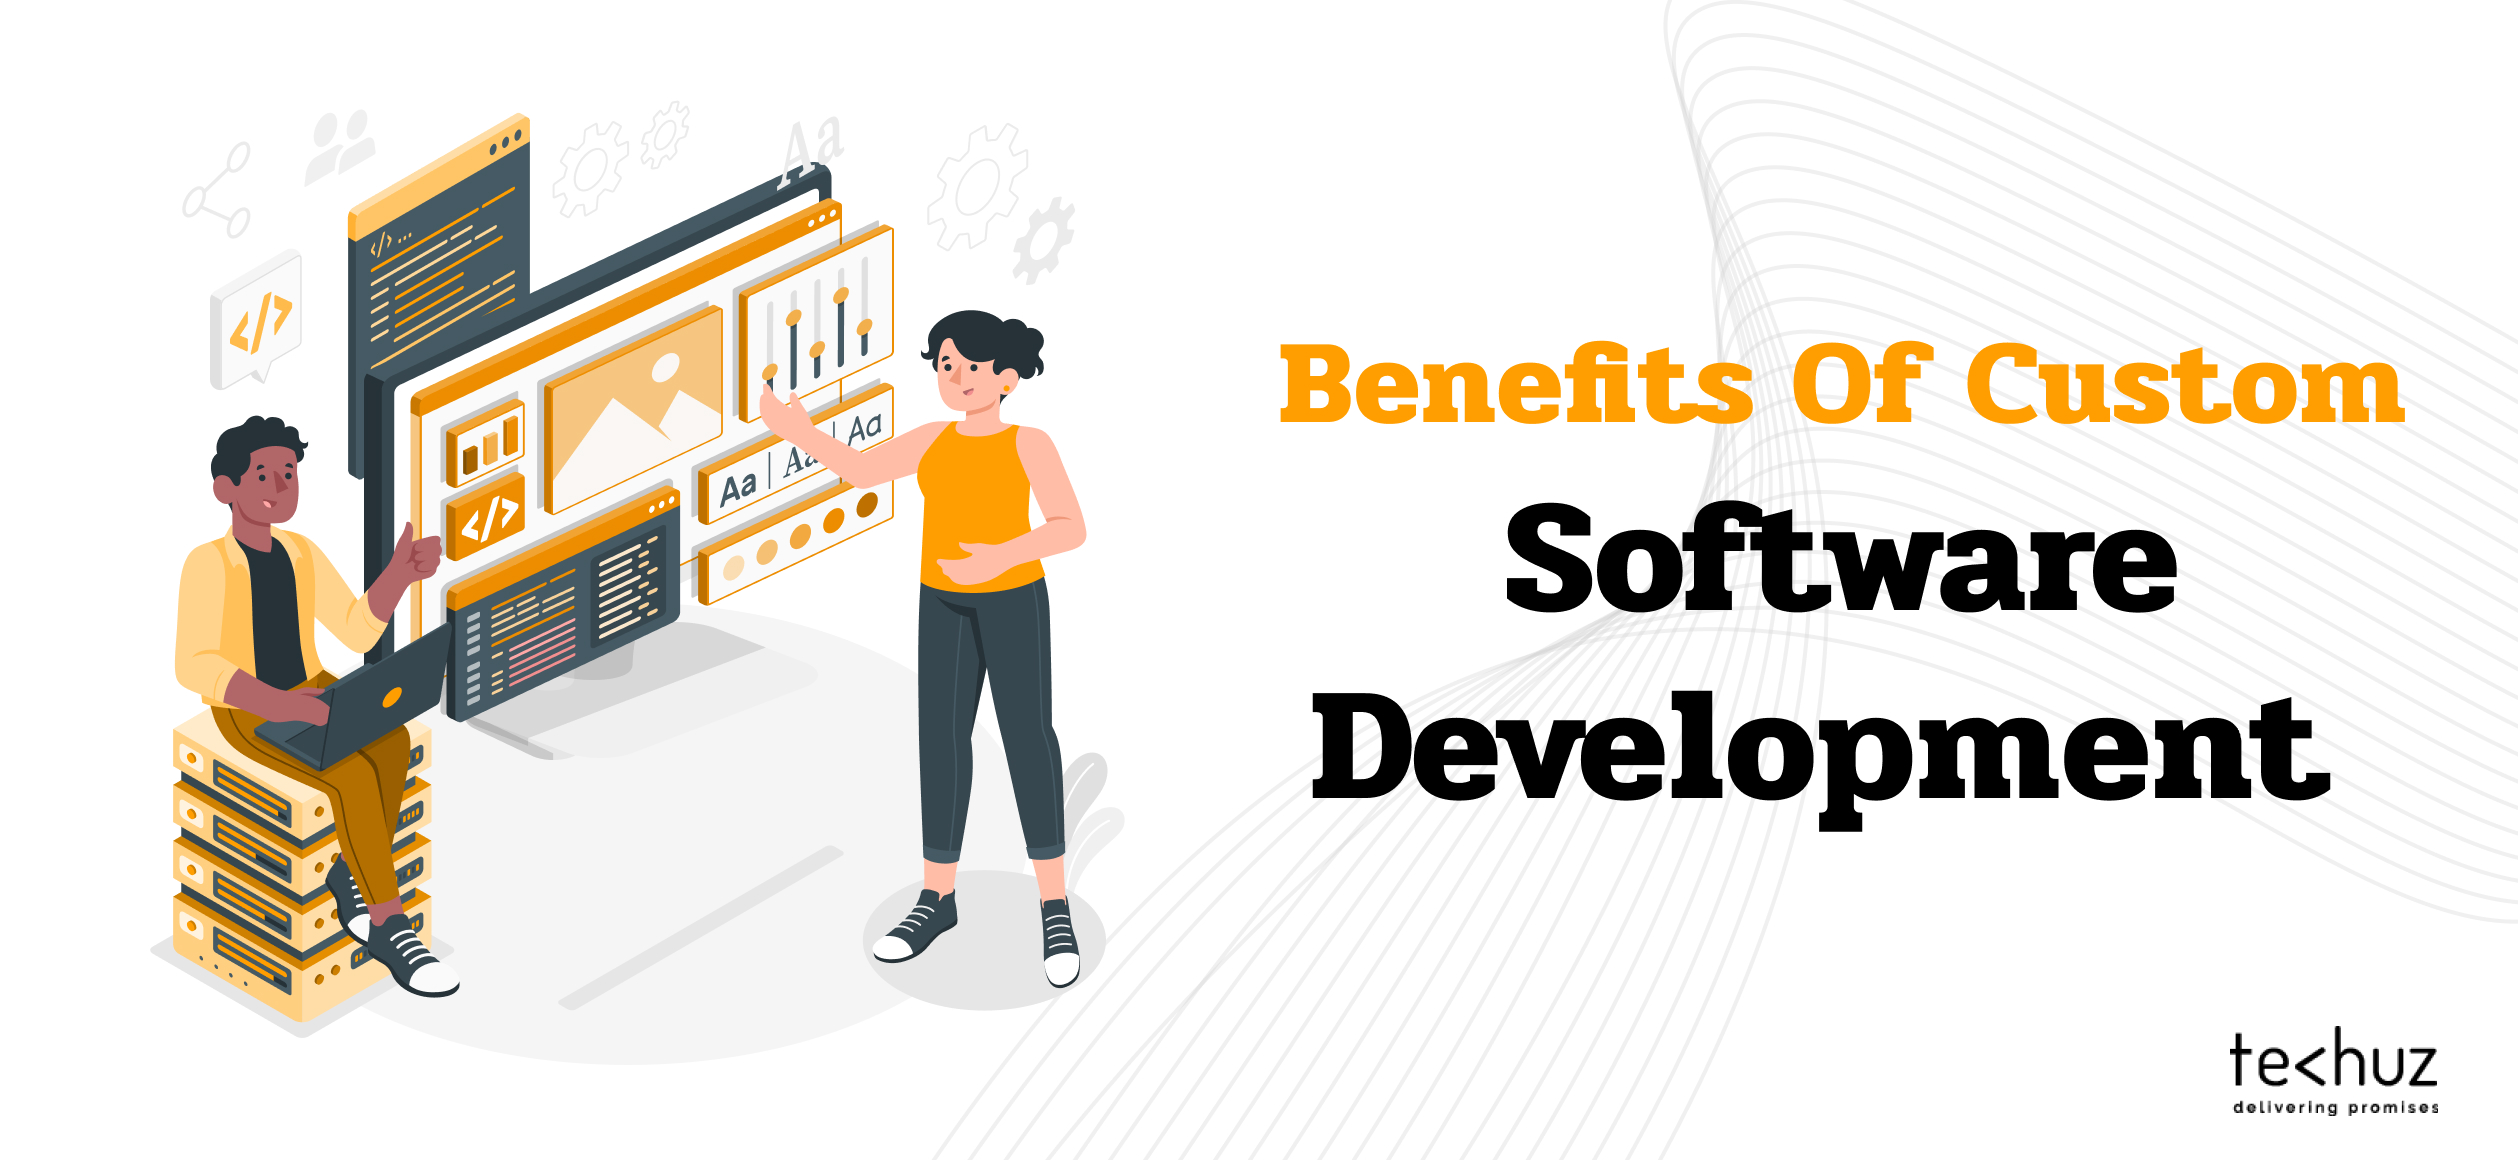 10 Benefits of Custom Software Development to Accelerate Business Growth